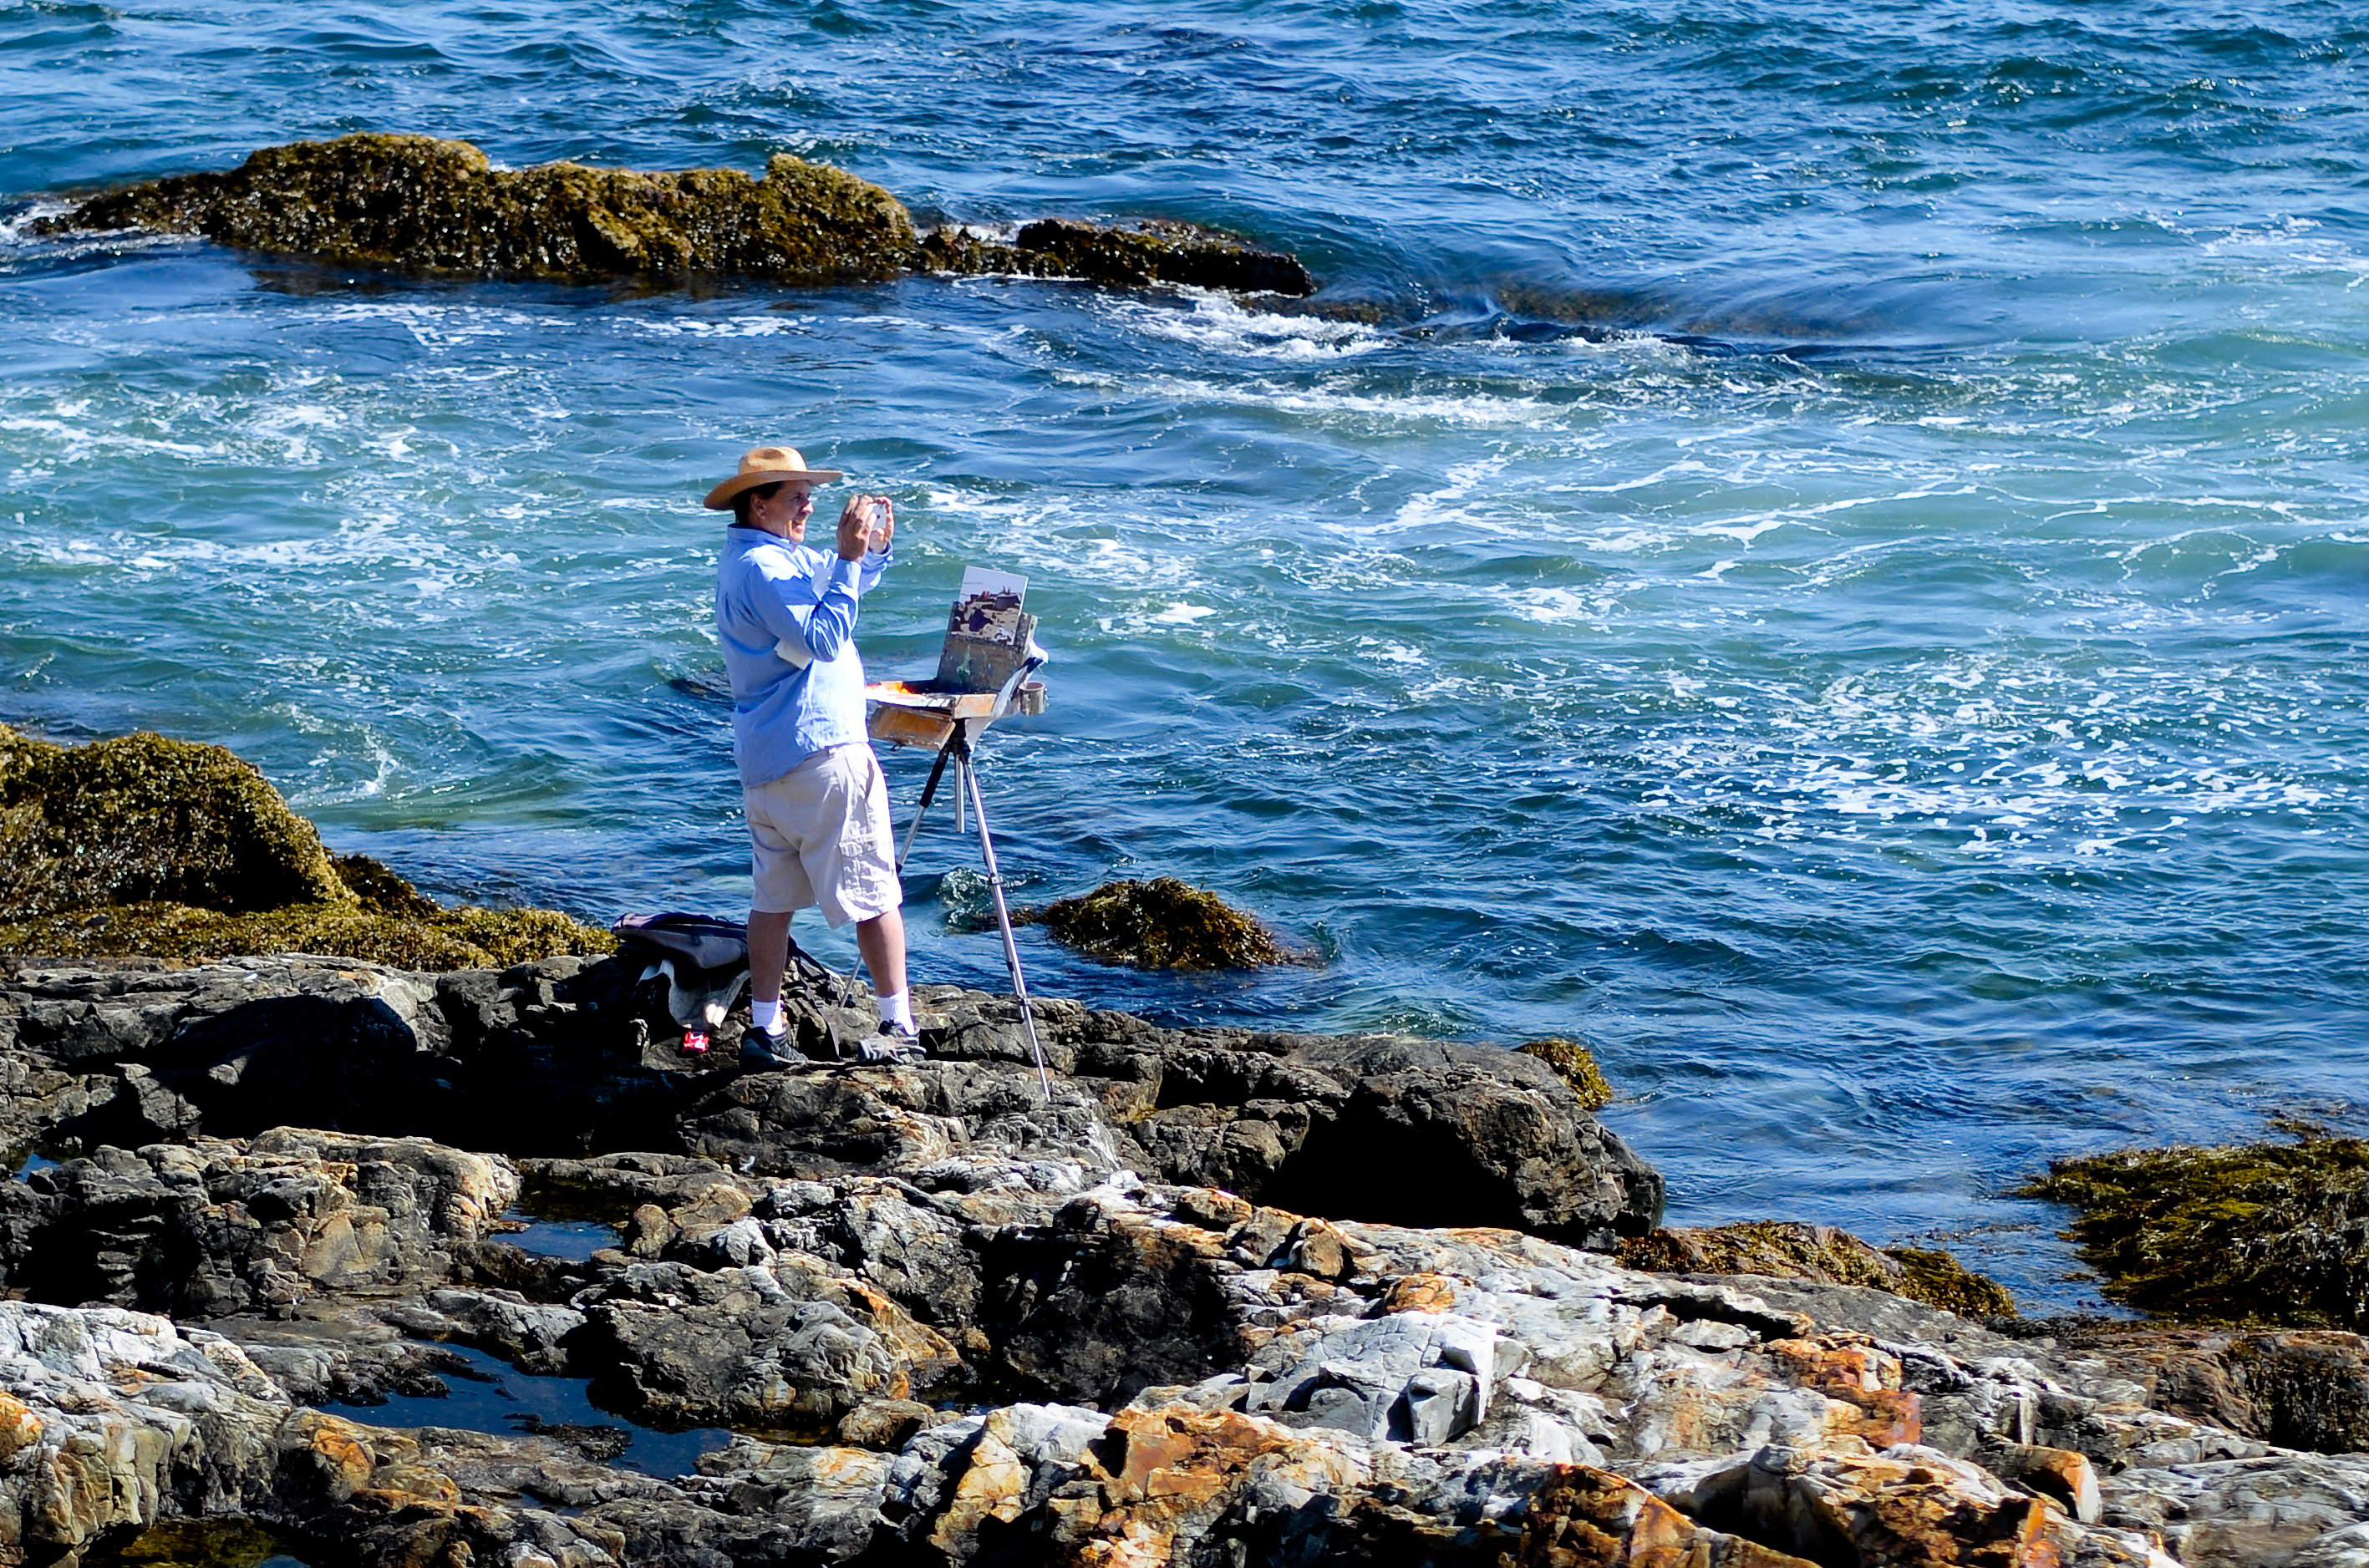 Artist standing on rocks takes a snapshot of the coastline he is painting